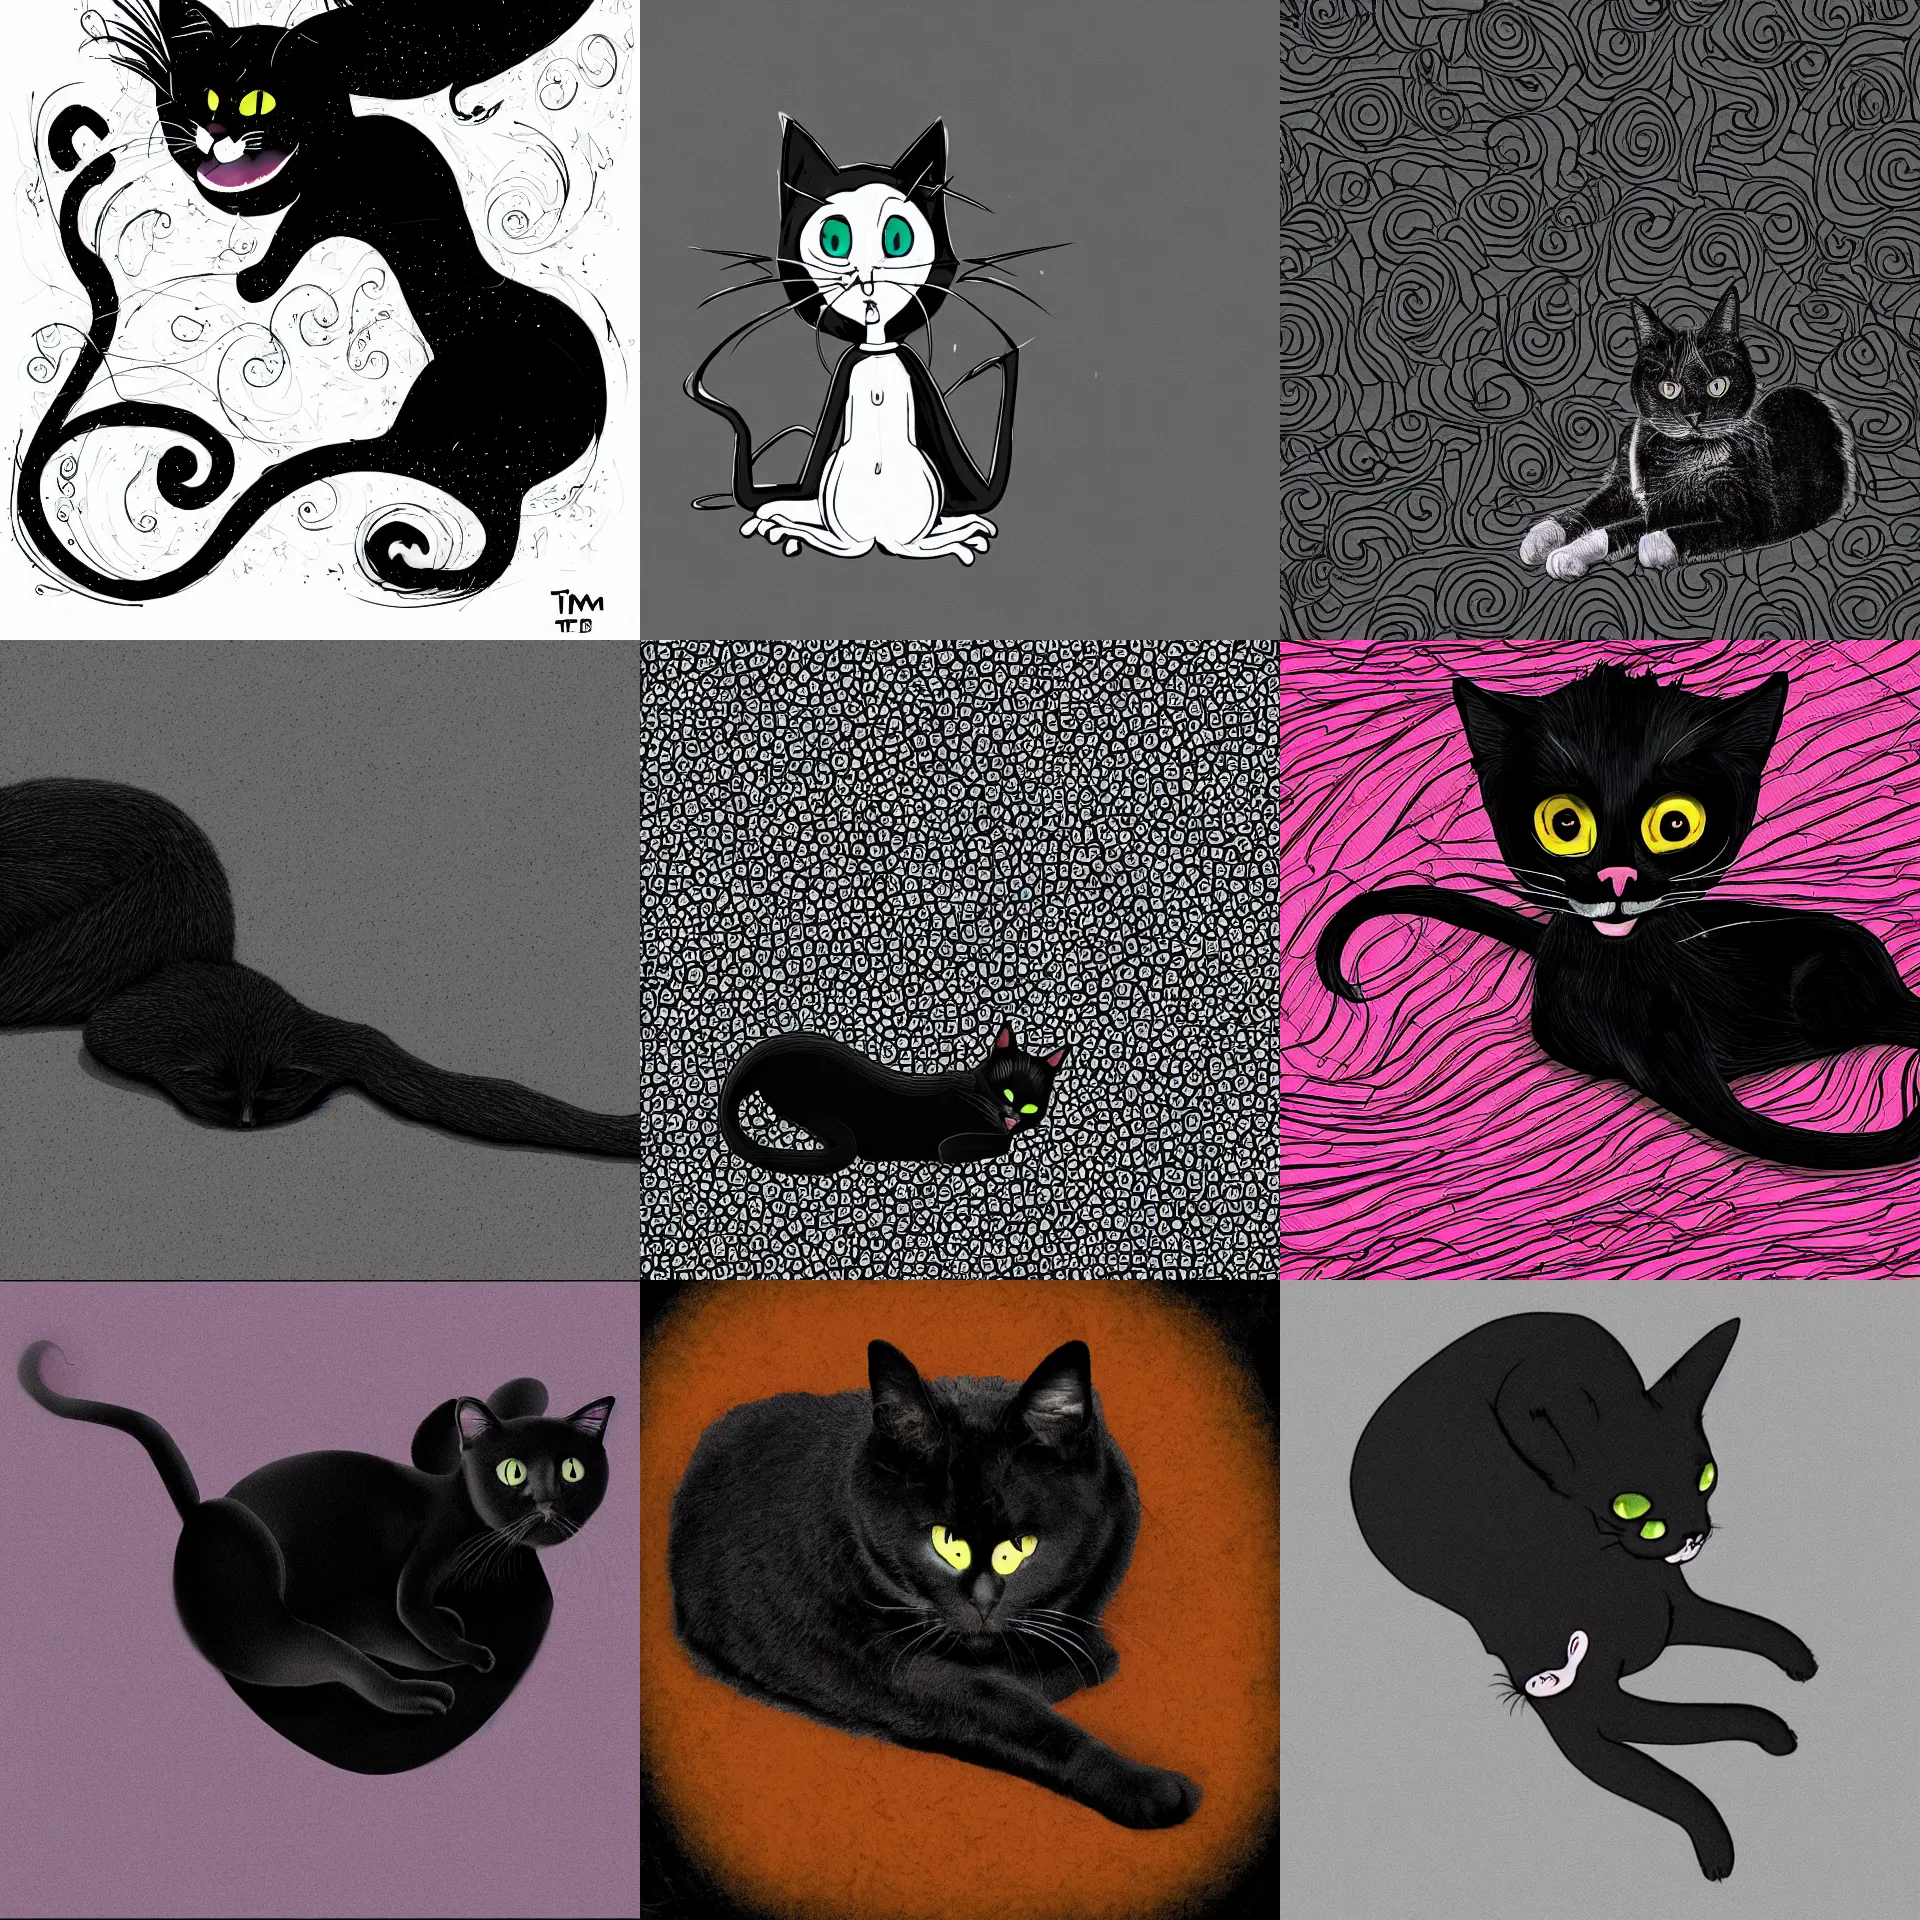 Prompt: a black relaxed cat lying on the floor, digital art, animated style, Tim Burton's style